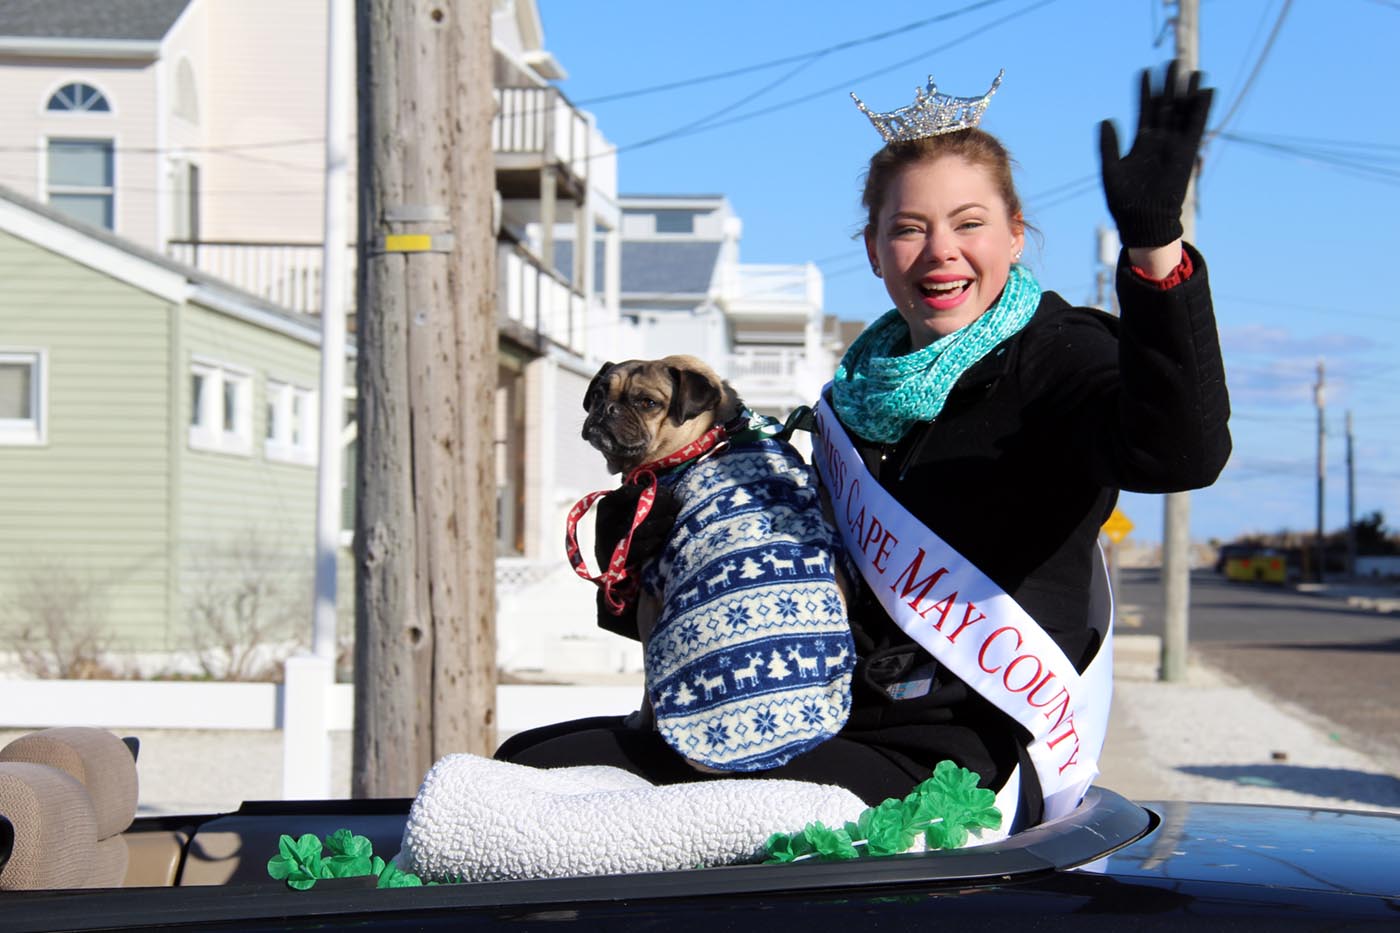 Miss Cape May County of 2017